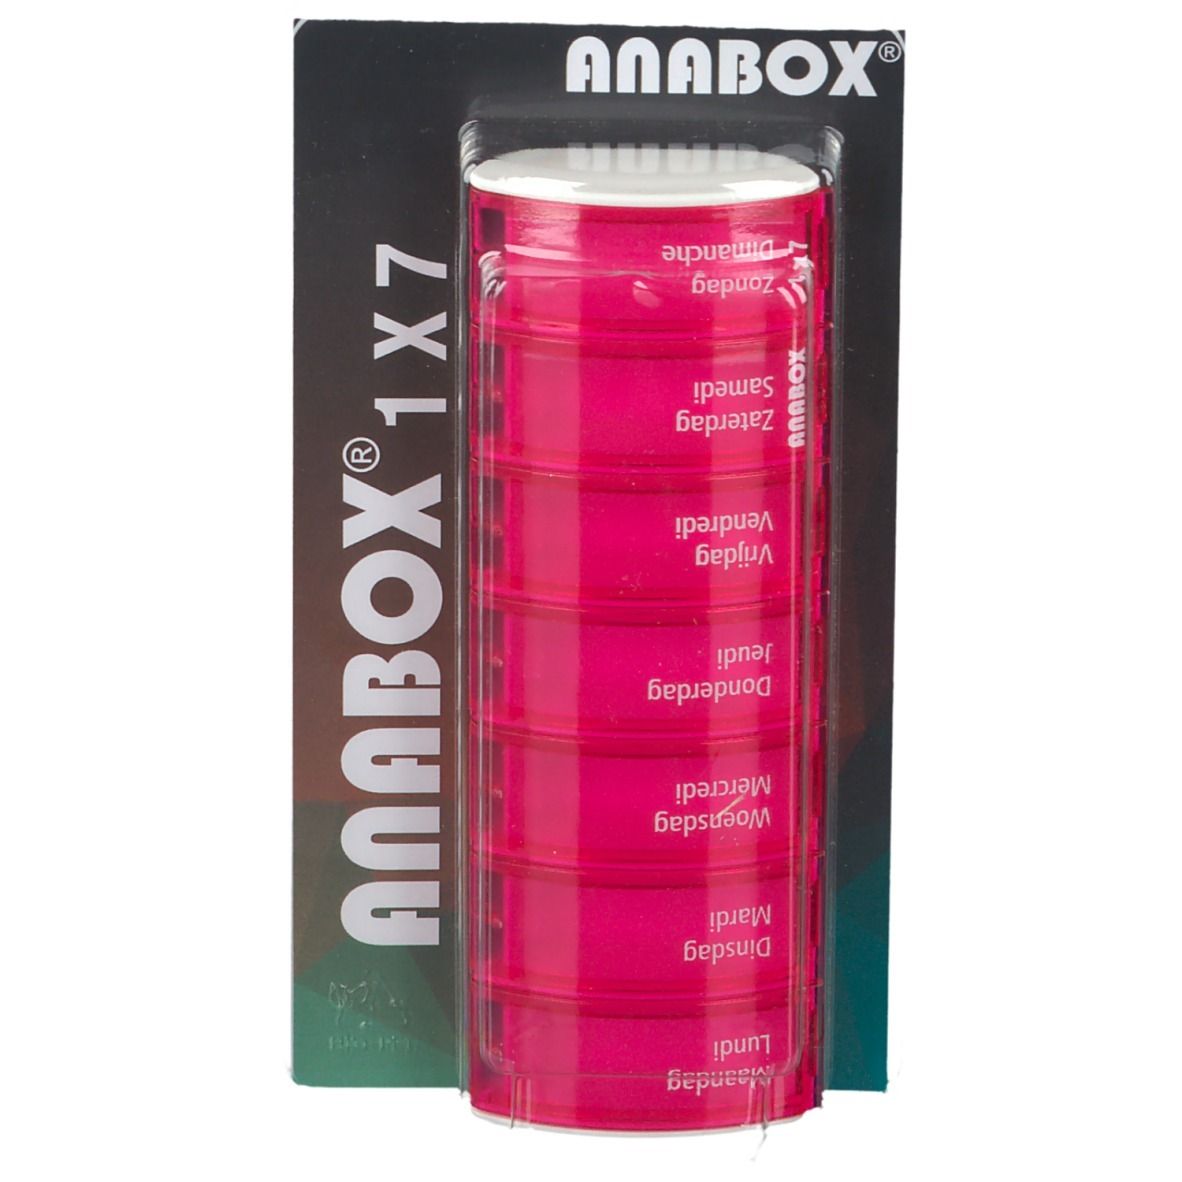 Image of ANABOX® 1x7 Tablettendosierer pink